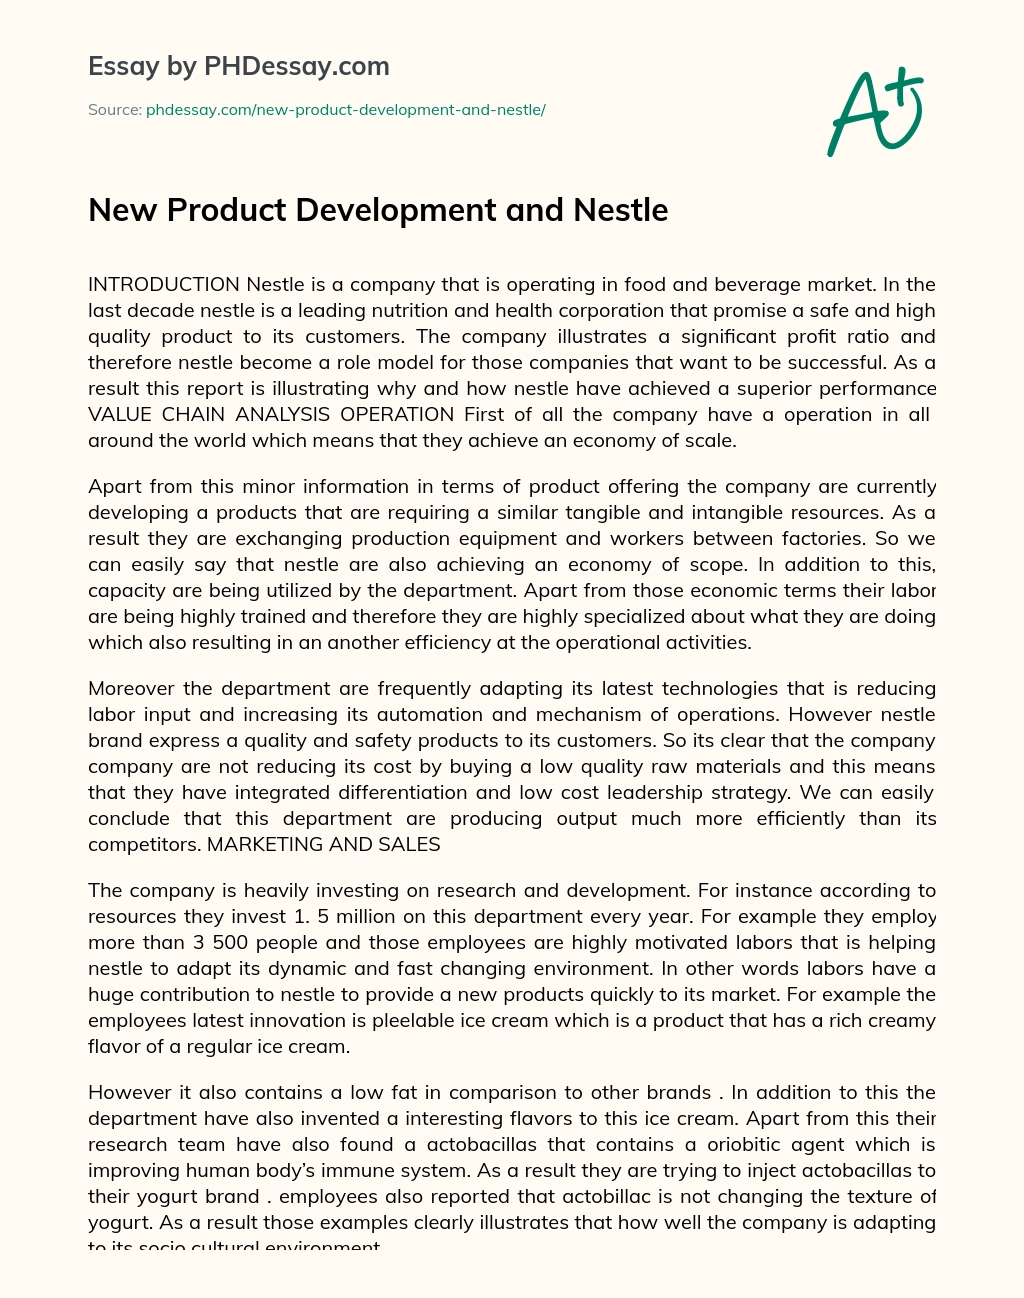 New Product Development and Nestle essay